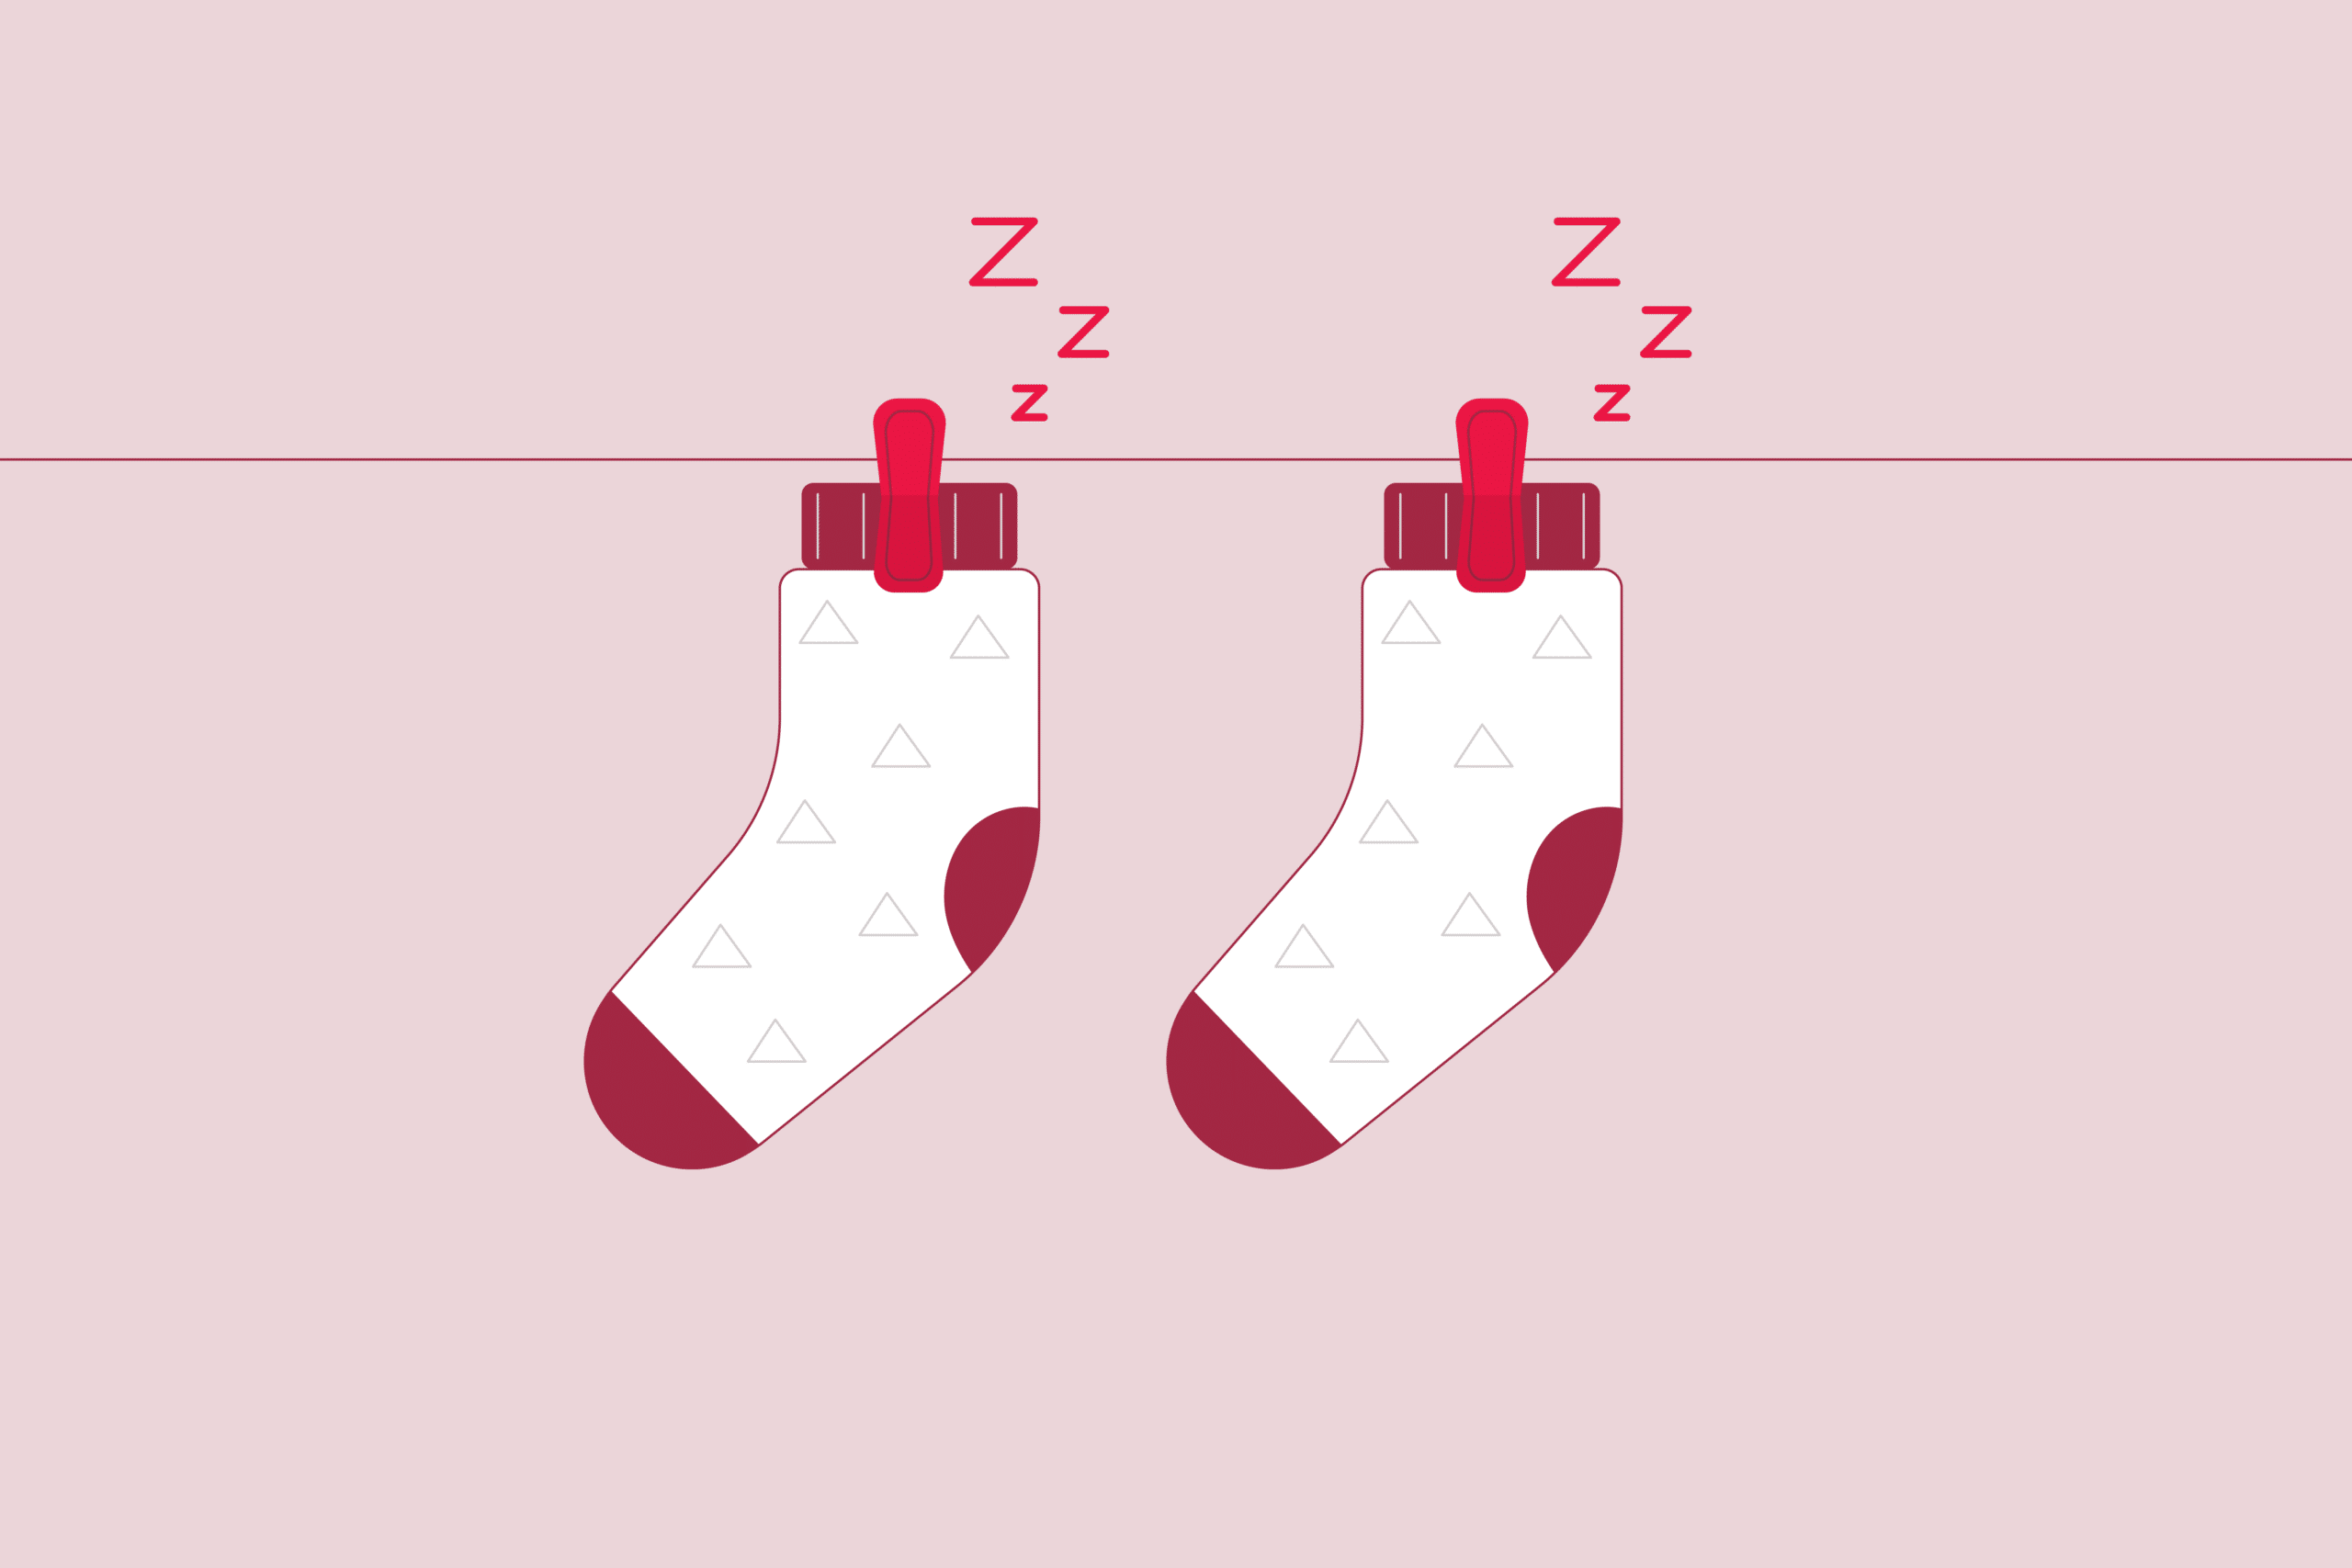 Sleeping with Socks On: Benefits, Risks, and More